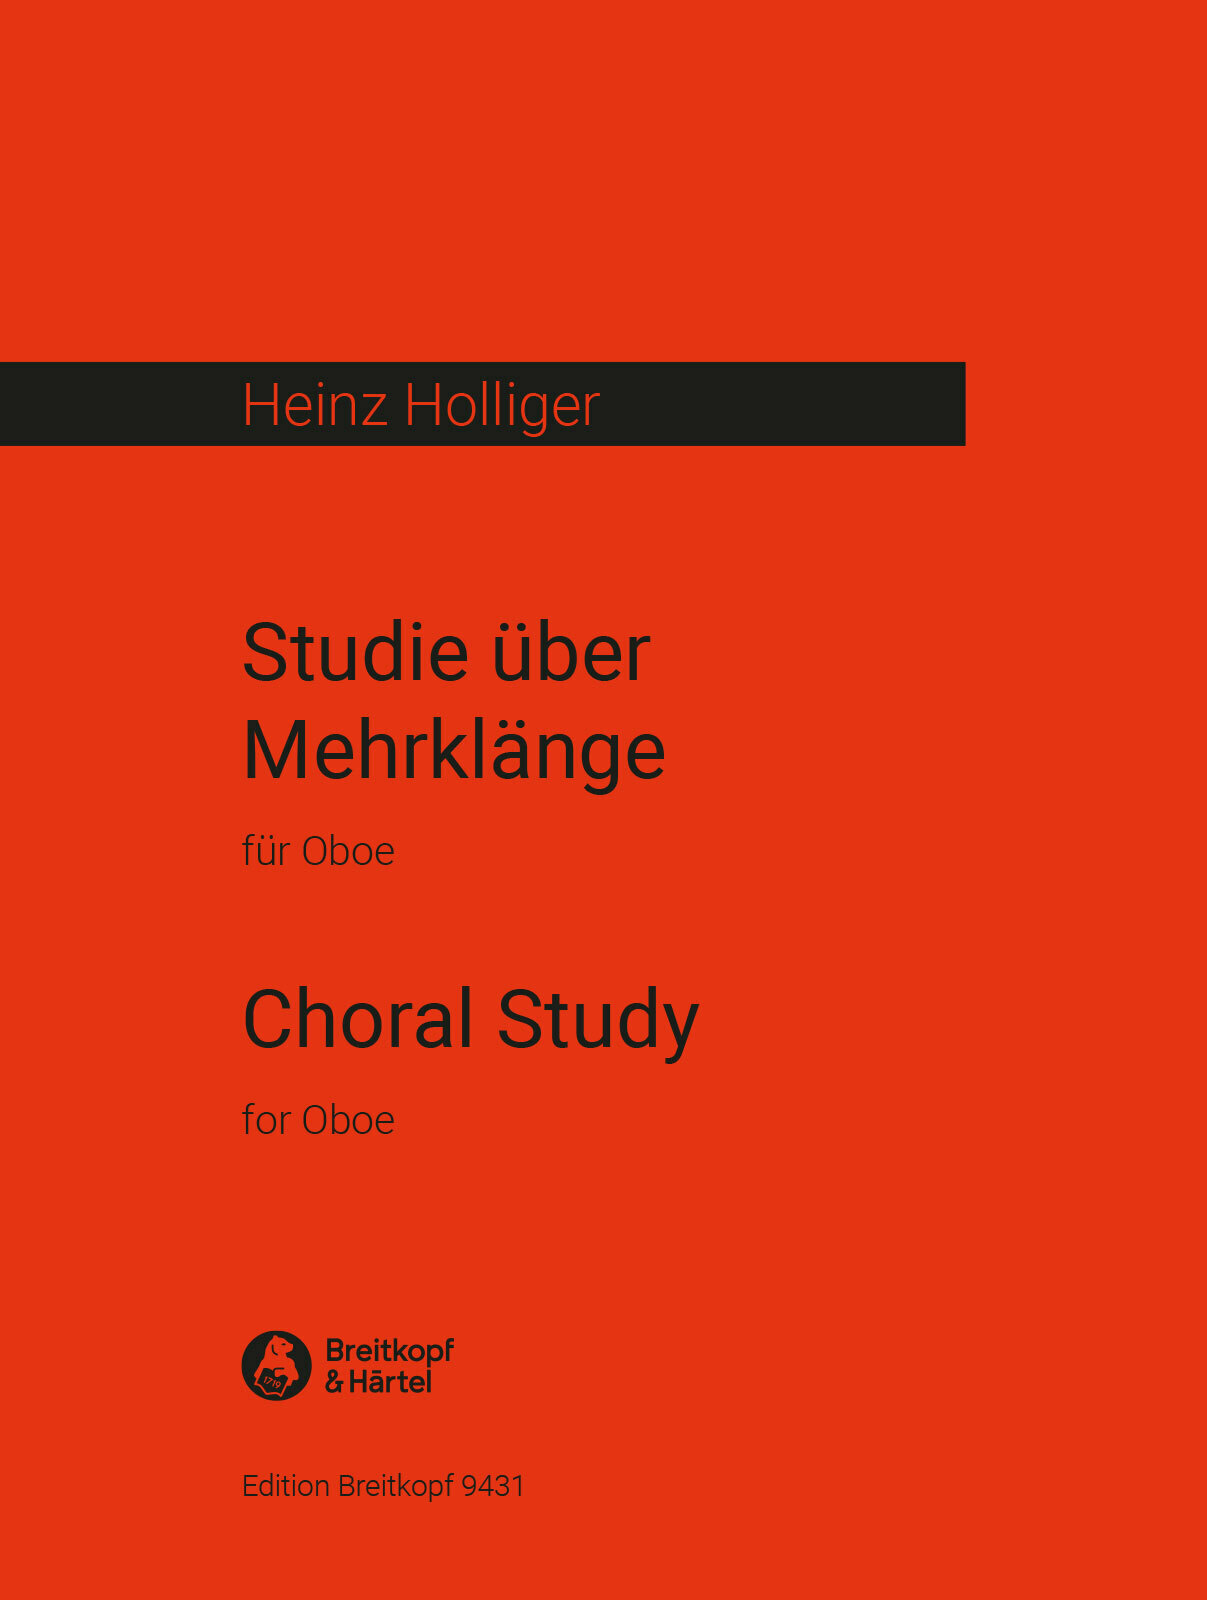 Holliger Choral Study For Oboe Sheet Music Songbook